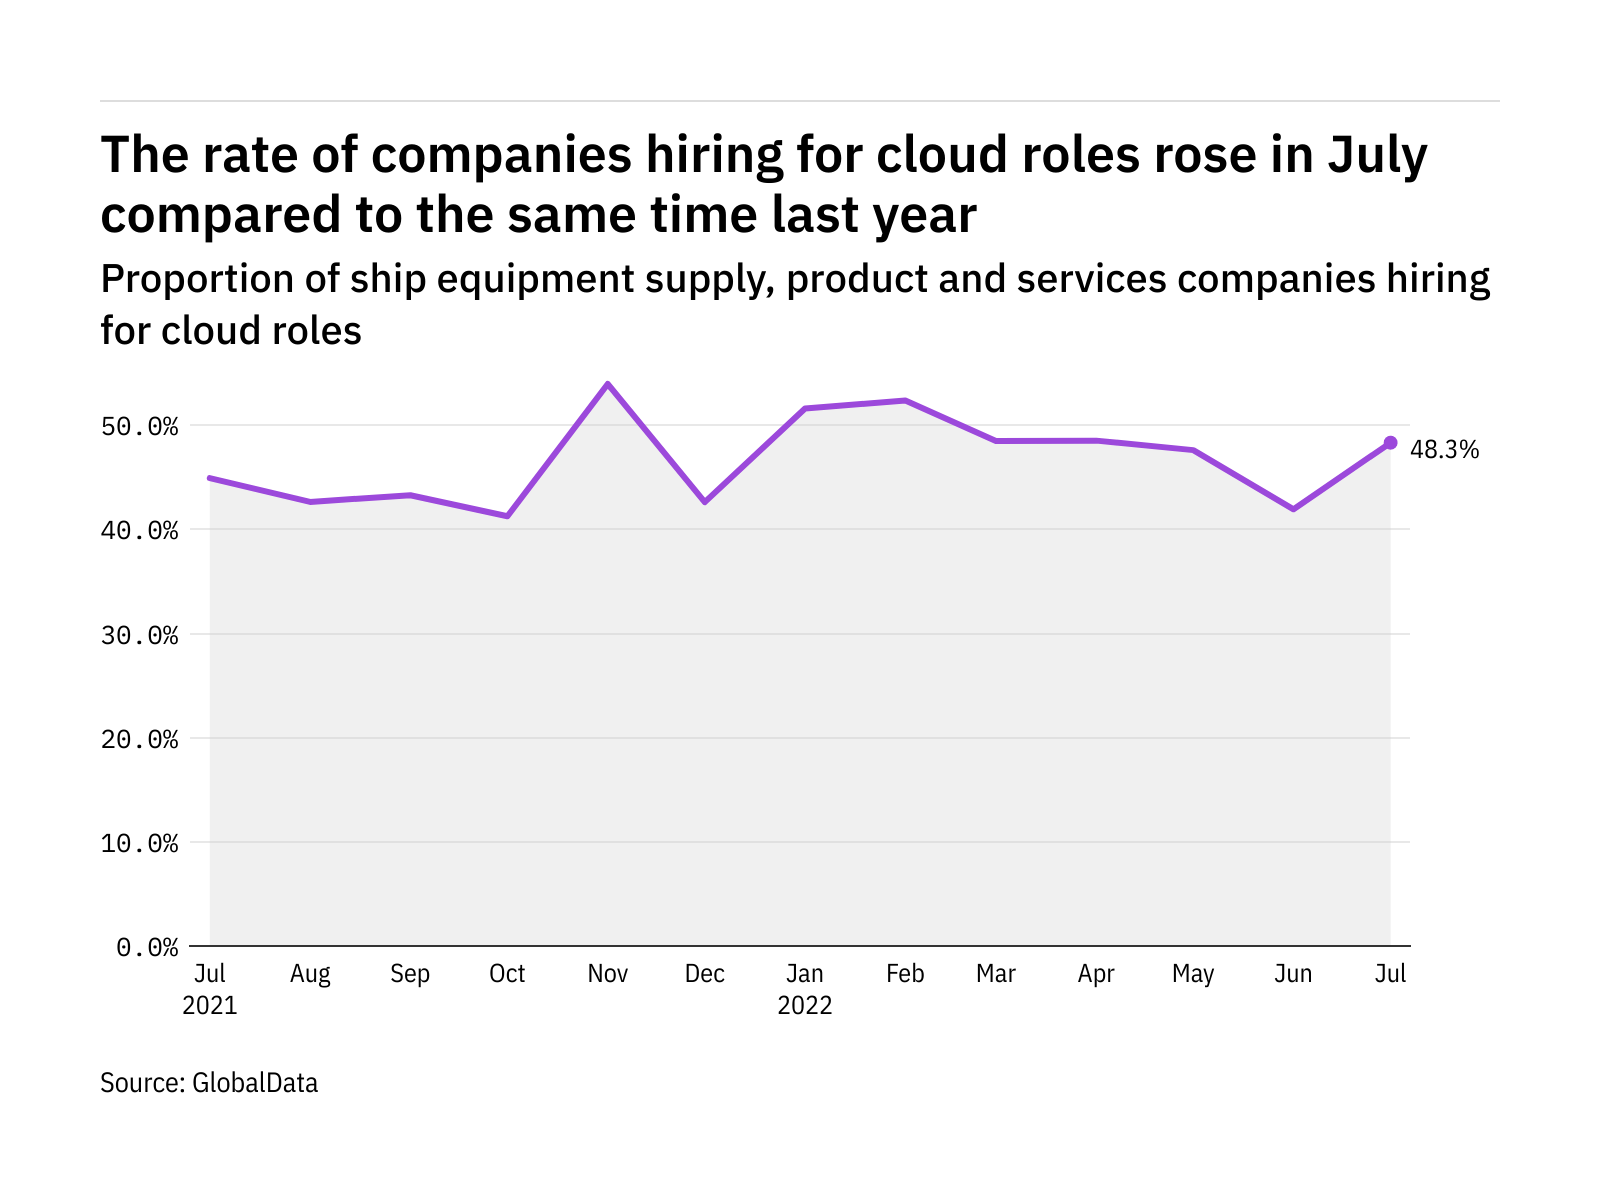 Cloud hiring levels in the ship industry rose in July 2022